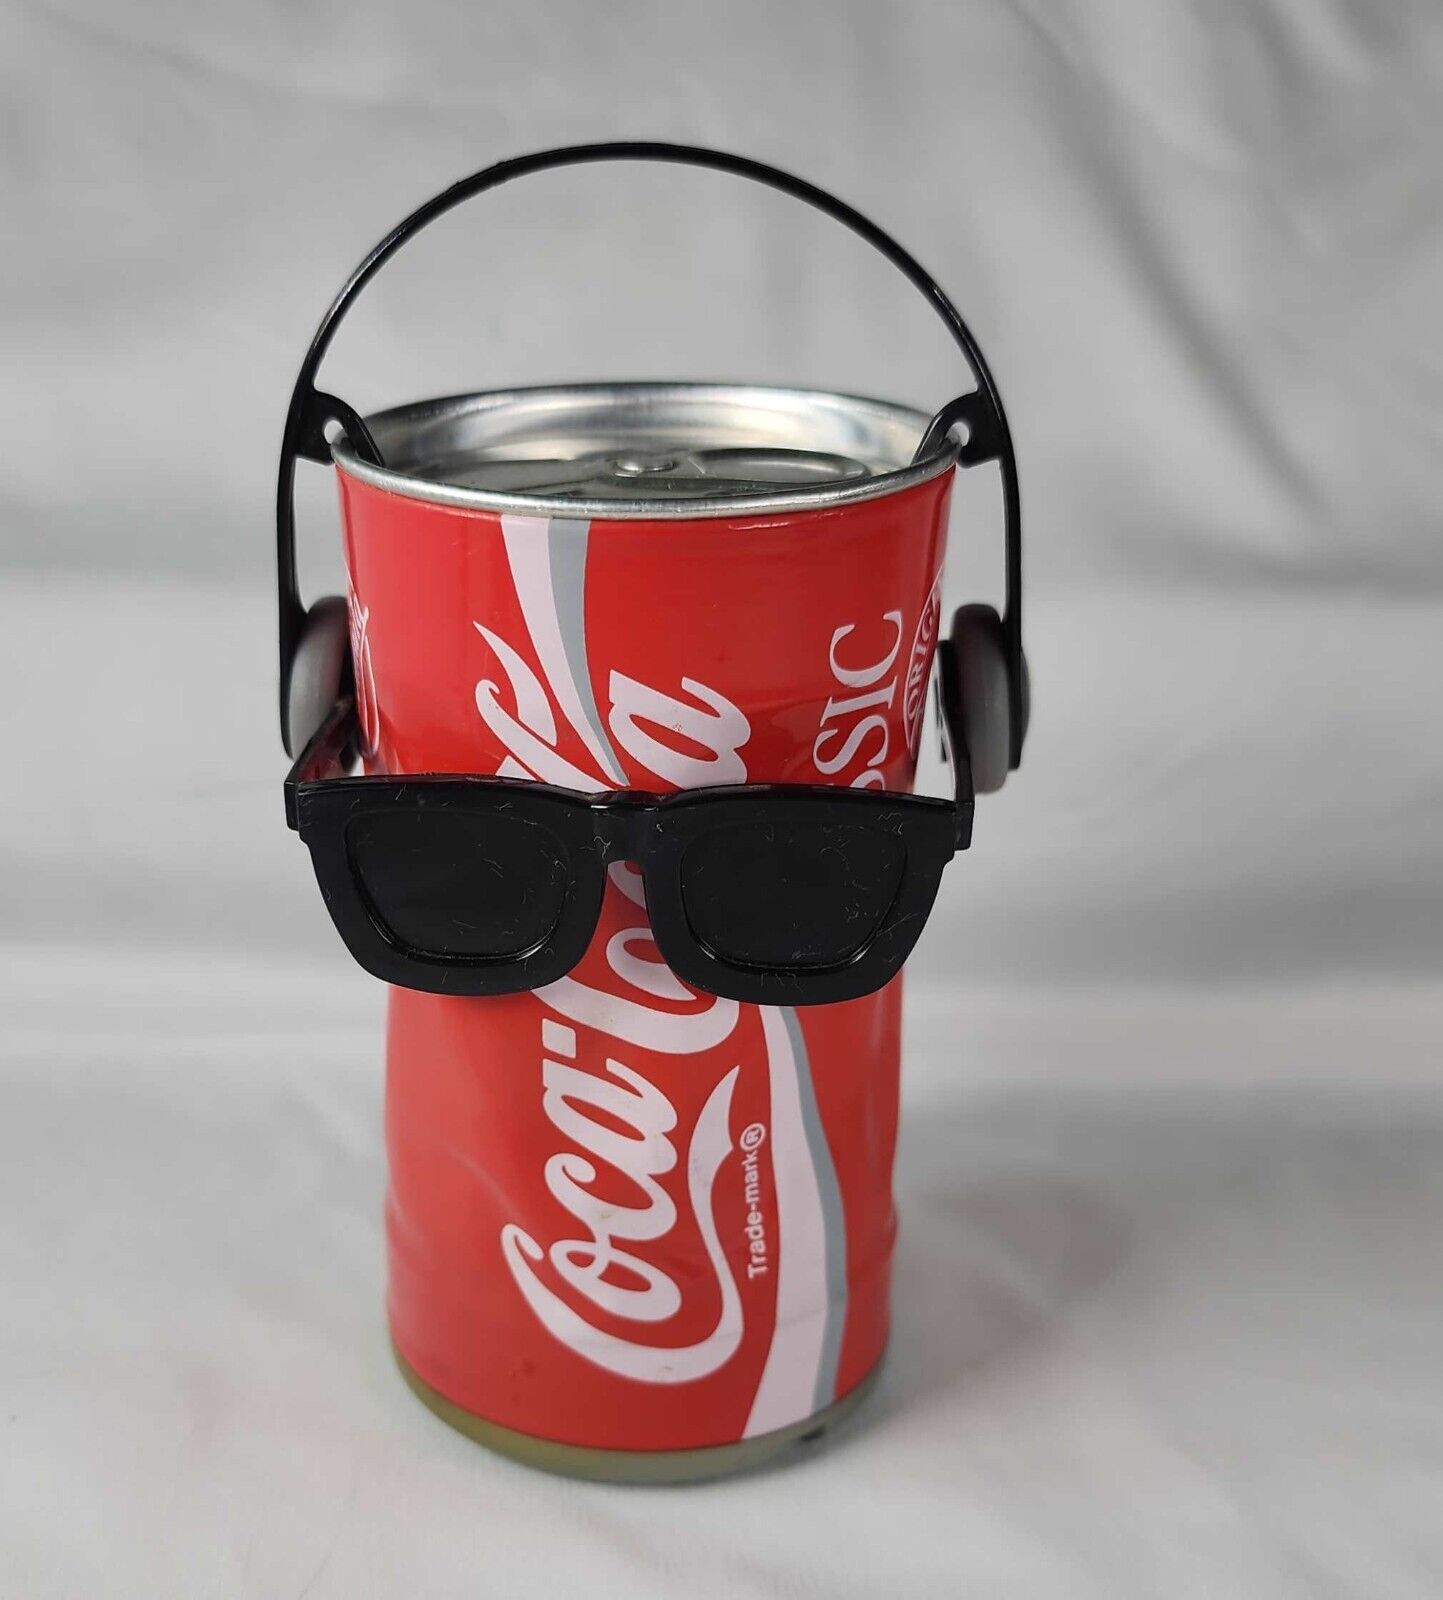 1989 Dancing Coca-Cola Can Coke Tap & Sound with Sunglasses Works Vintage Coke